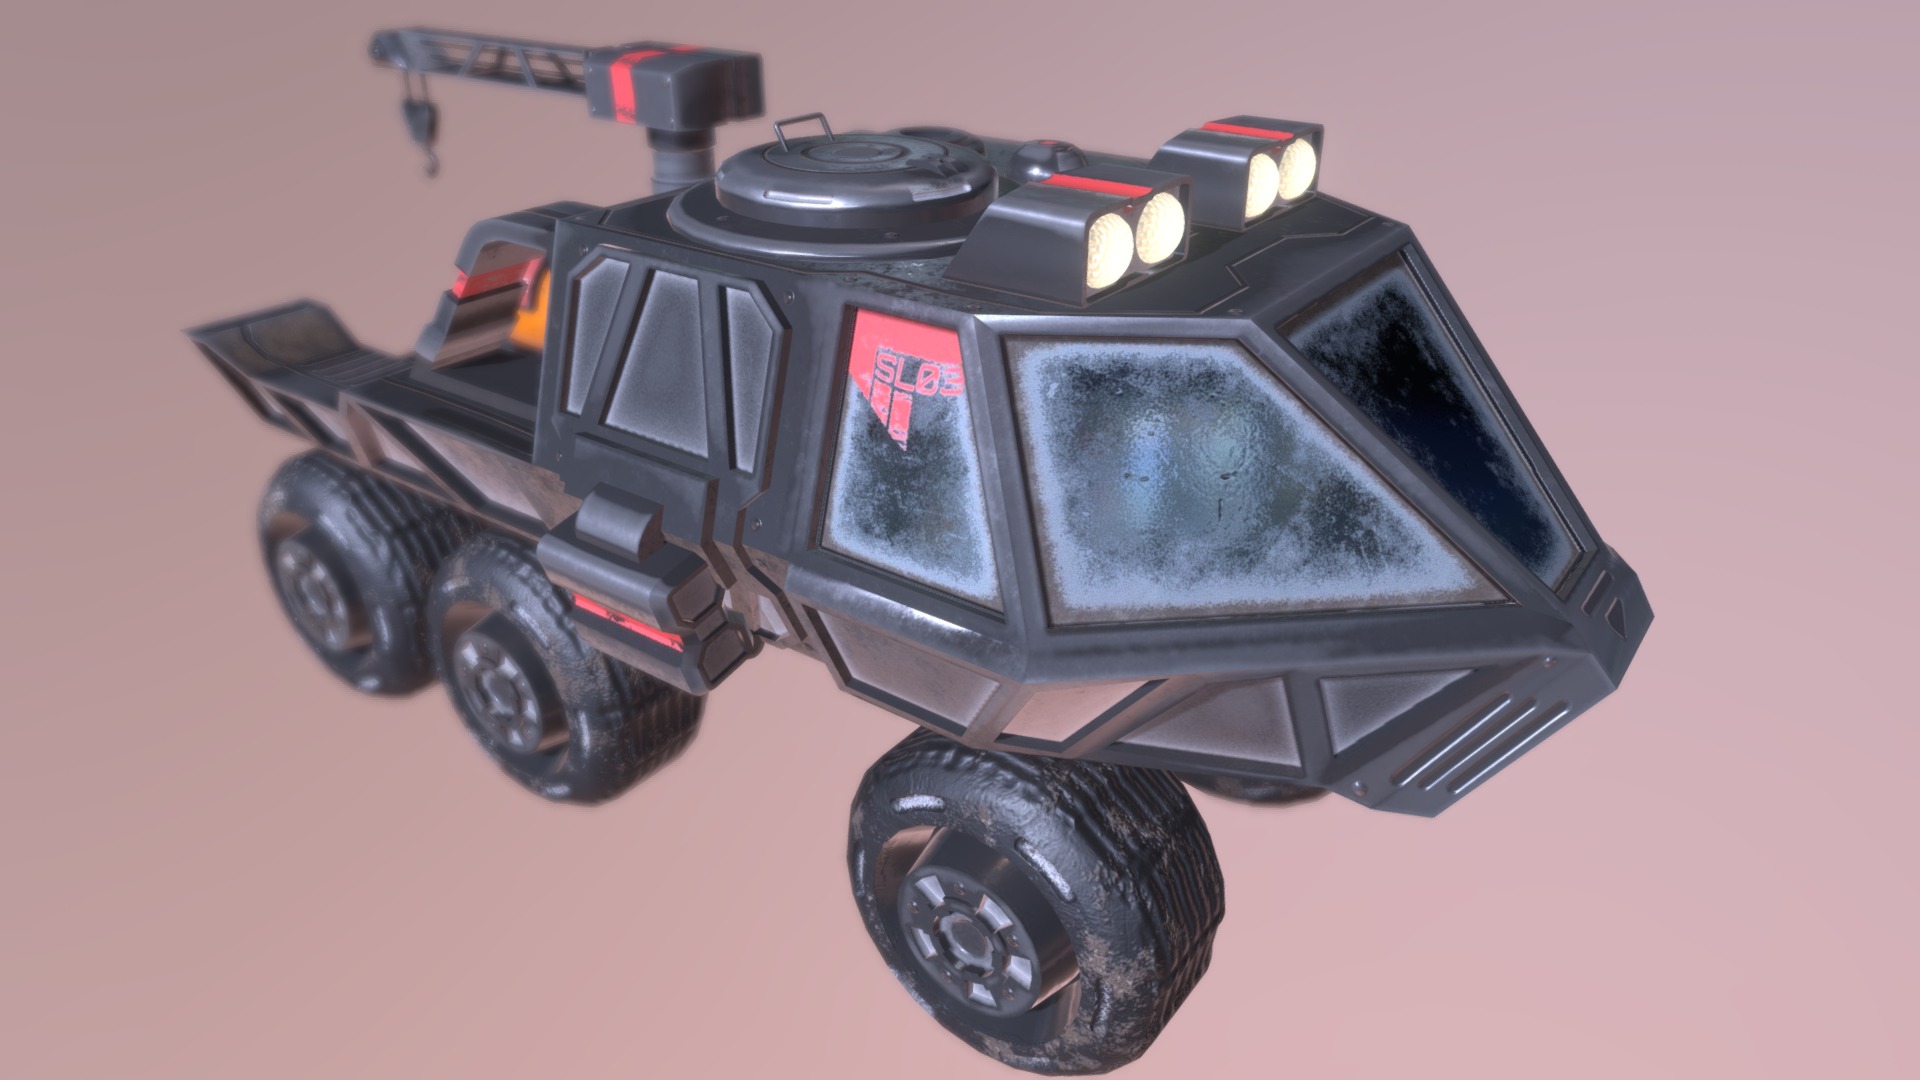 This was a small part of a larger project I've been working on. I drew inspiration from the recently unveiled Mars rover concept vehicle Nasa created, and from the lunar rovers Gavin Rothery (artstation.com/gavrov) created for the movie Moon. Created with Modo and Substance Painter. 

I don't know why, but it seems my UV's are getting distorted here 3d model